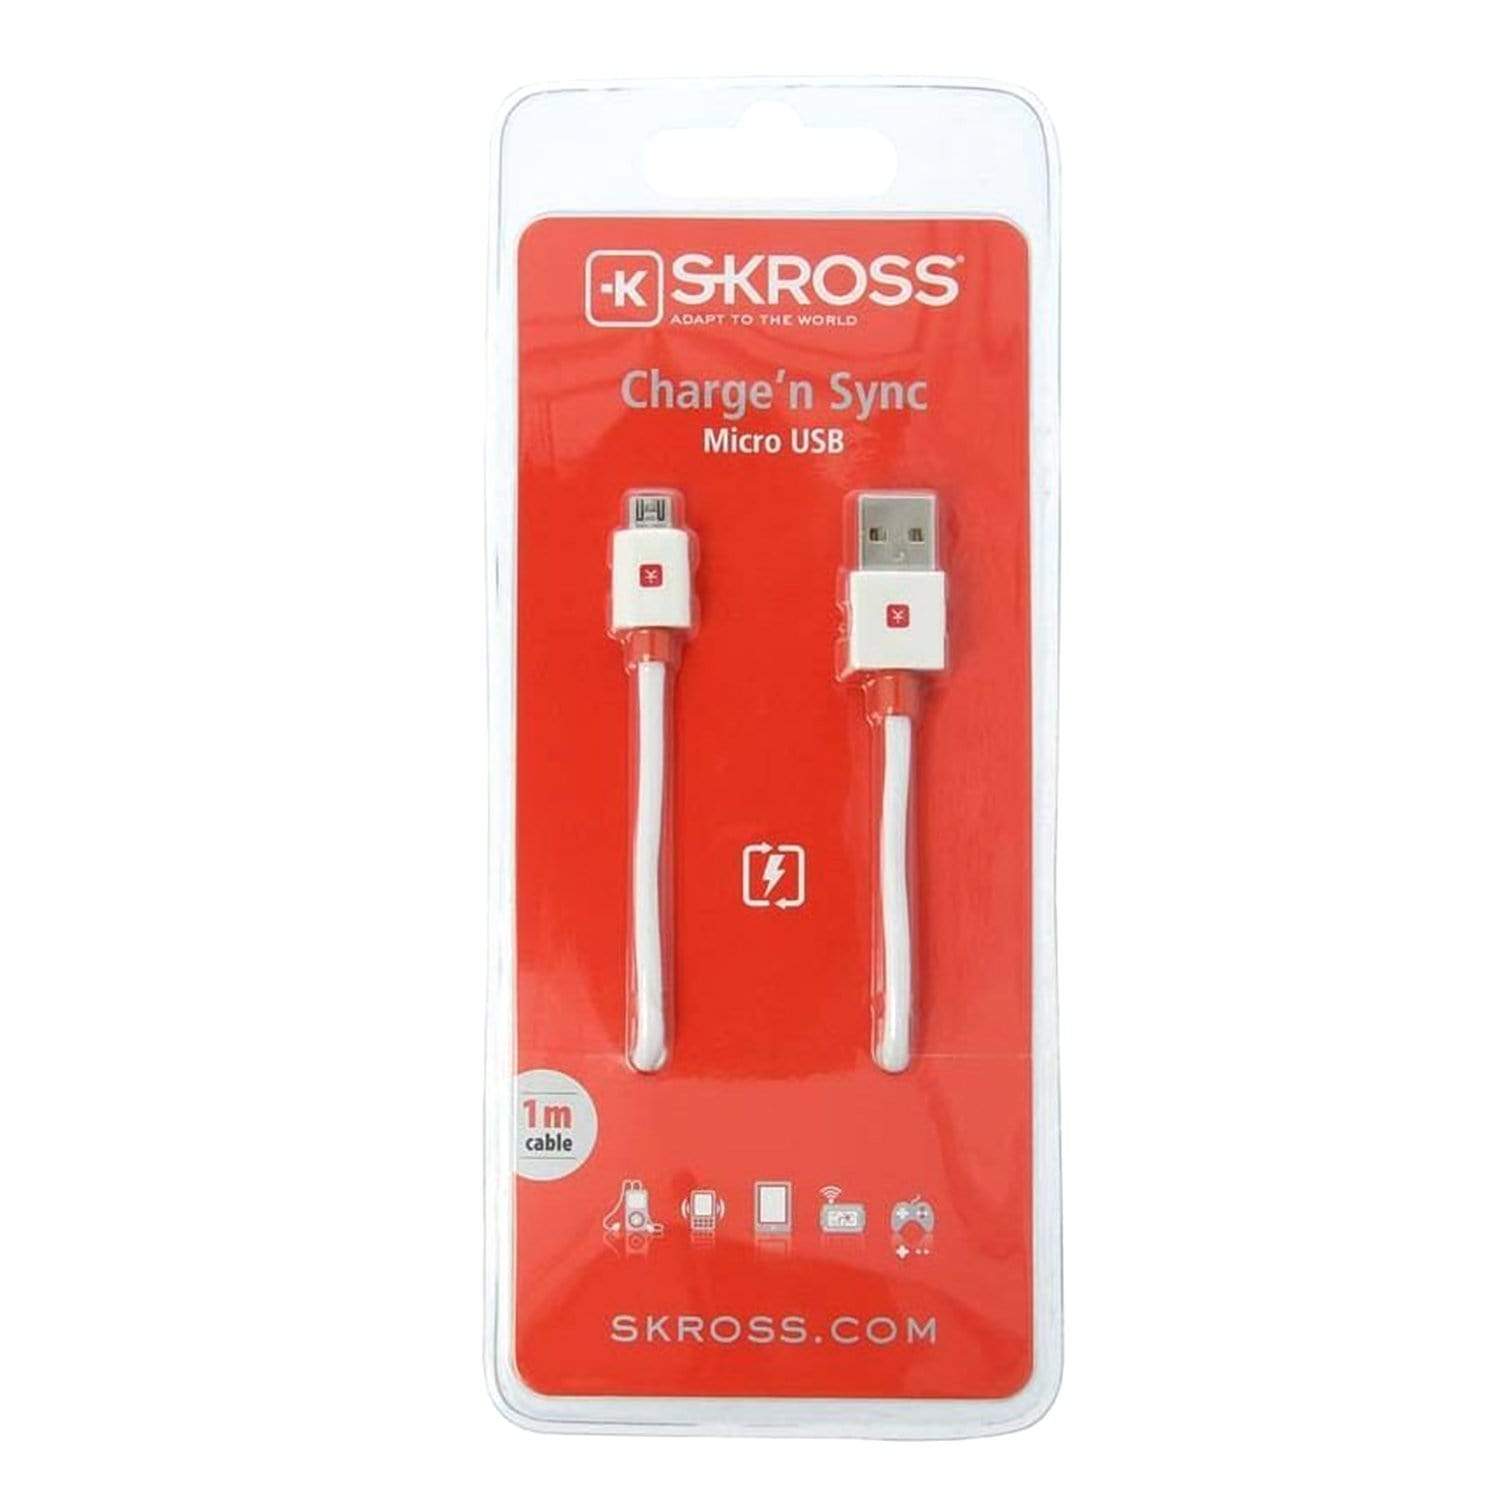 Skross Essentials Charge N Sync Micro USB Cable - White - 2700202E - Jashanmal Home